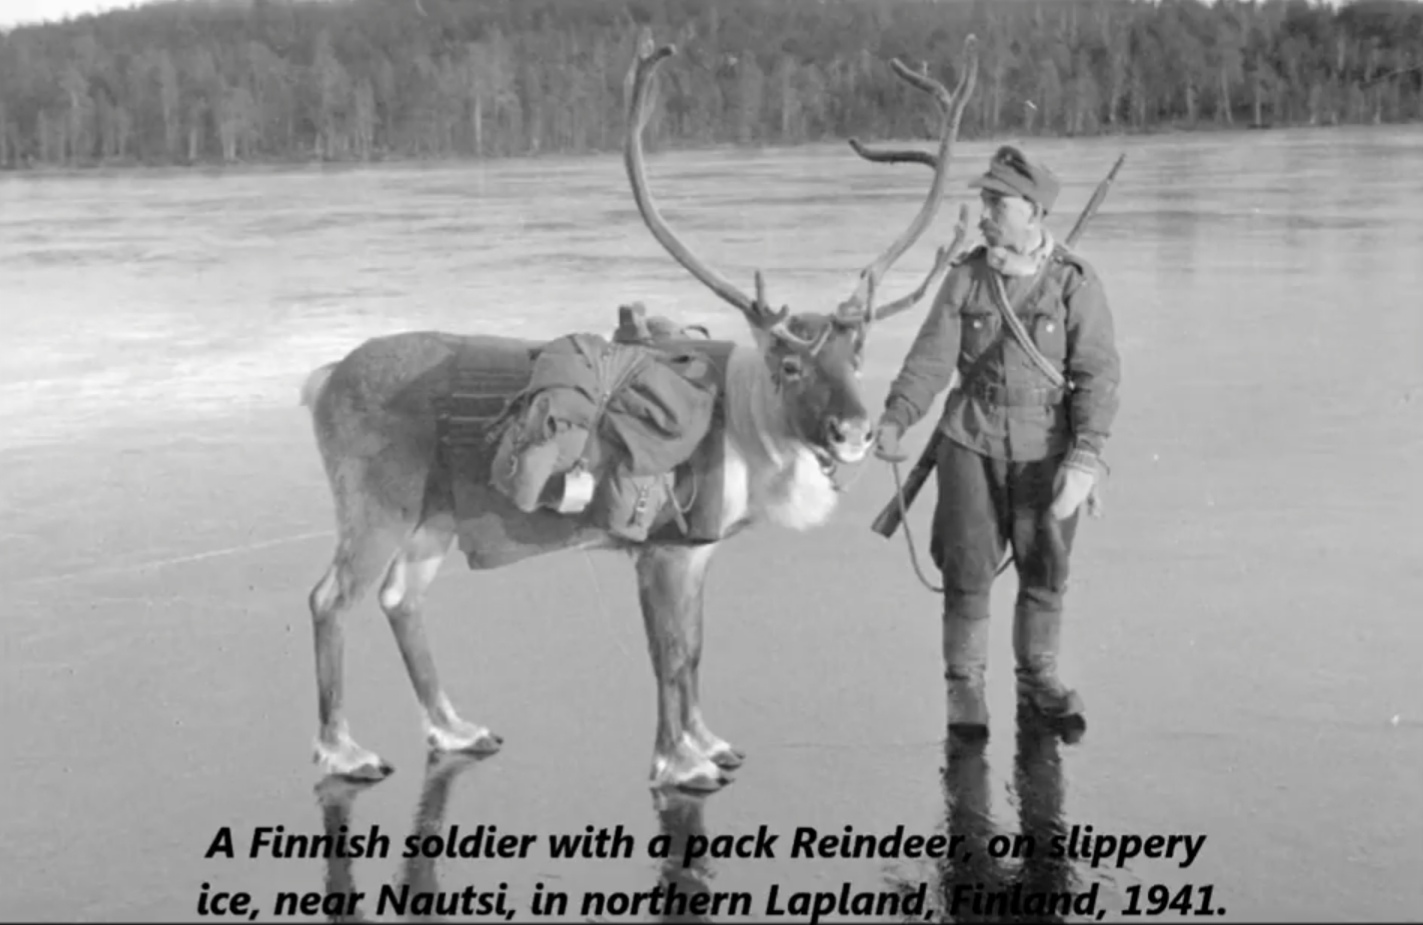 finnish soldier reindeer - A Finnish soldier with a pack Reindeer on slippery ice, near Nautsi, in northern Lapland, Finland, 1941.